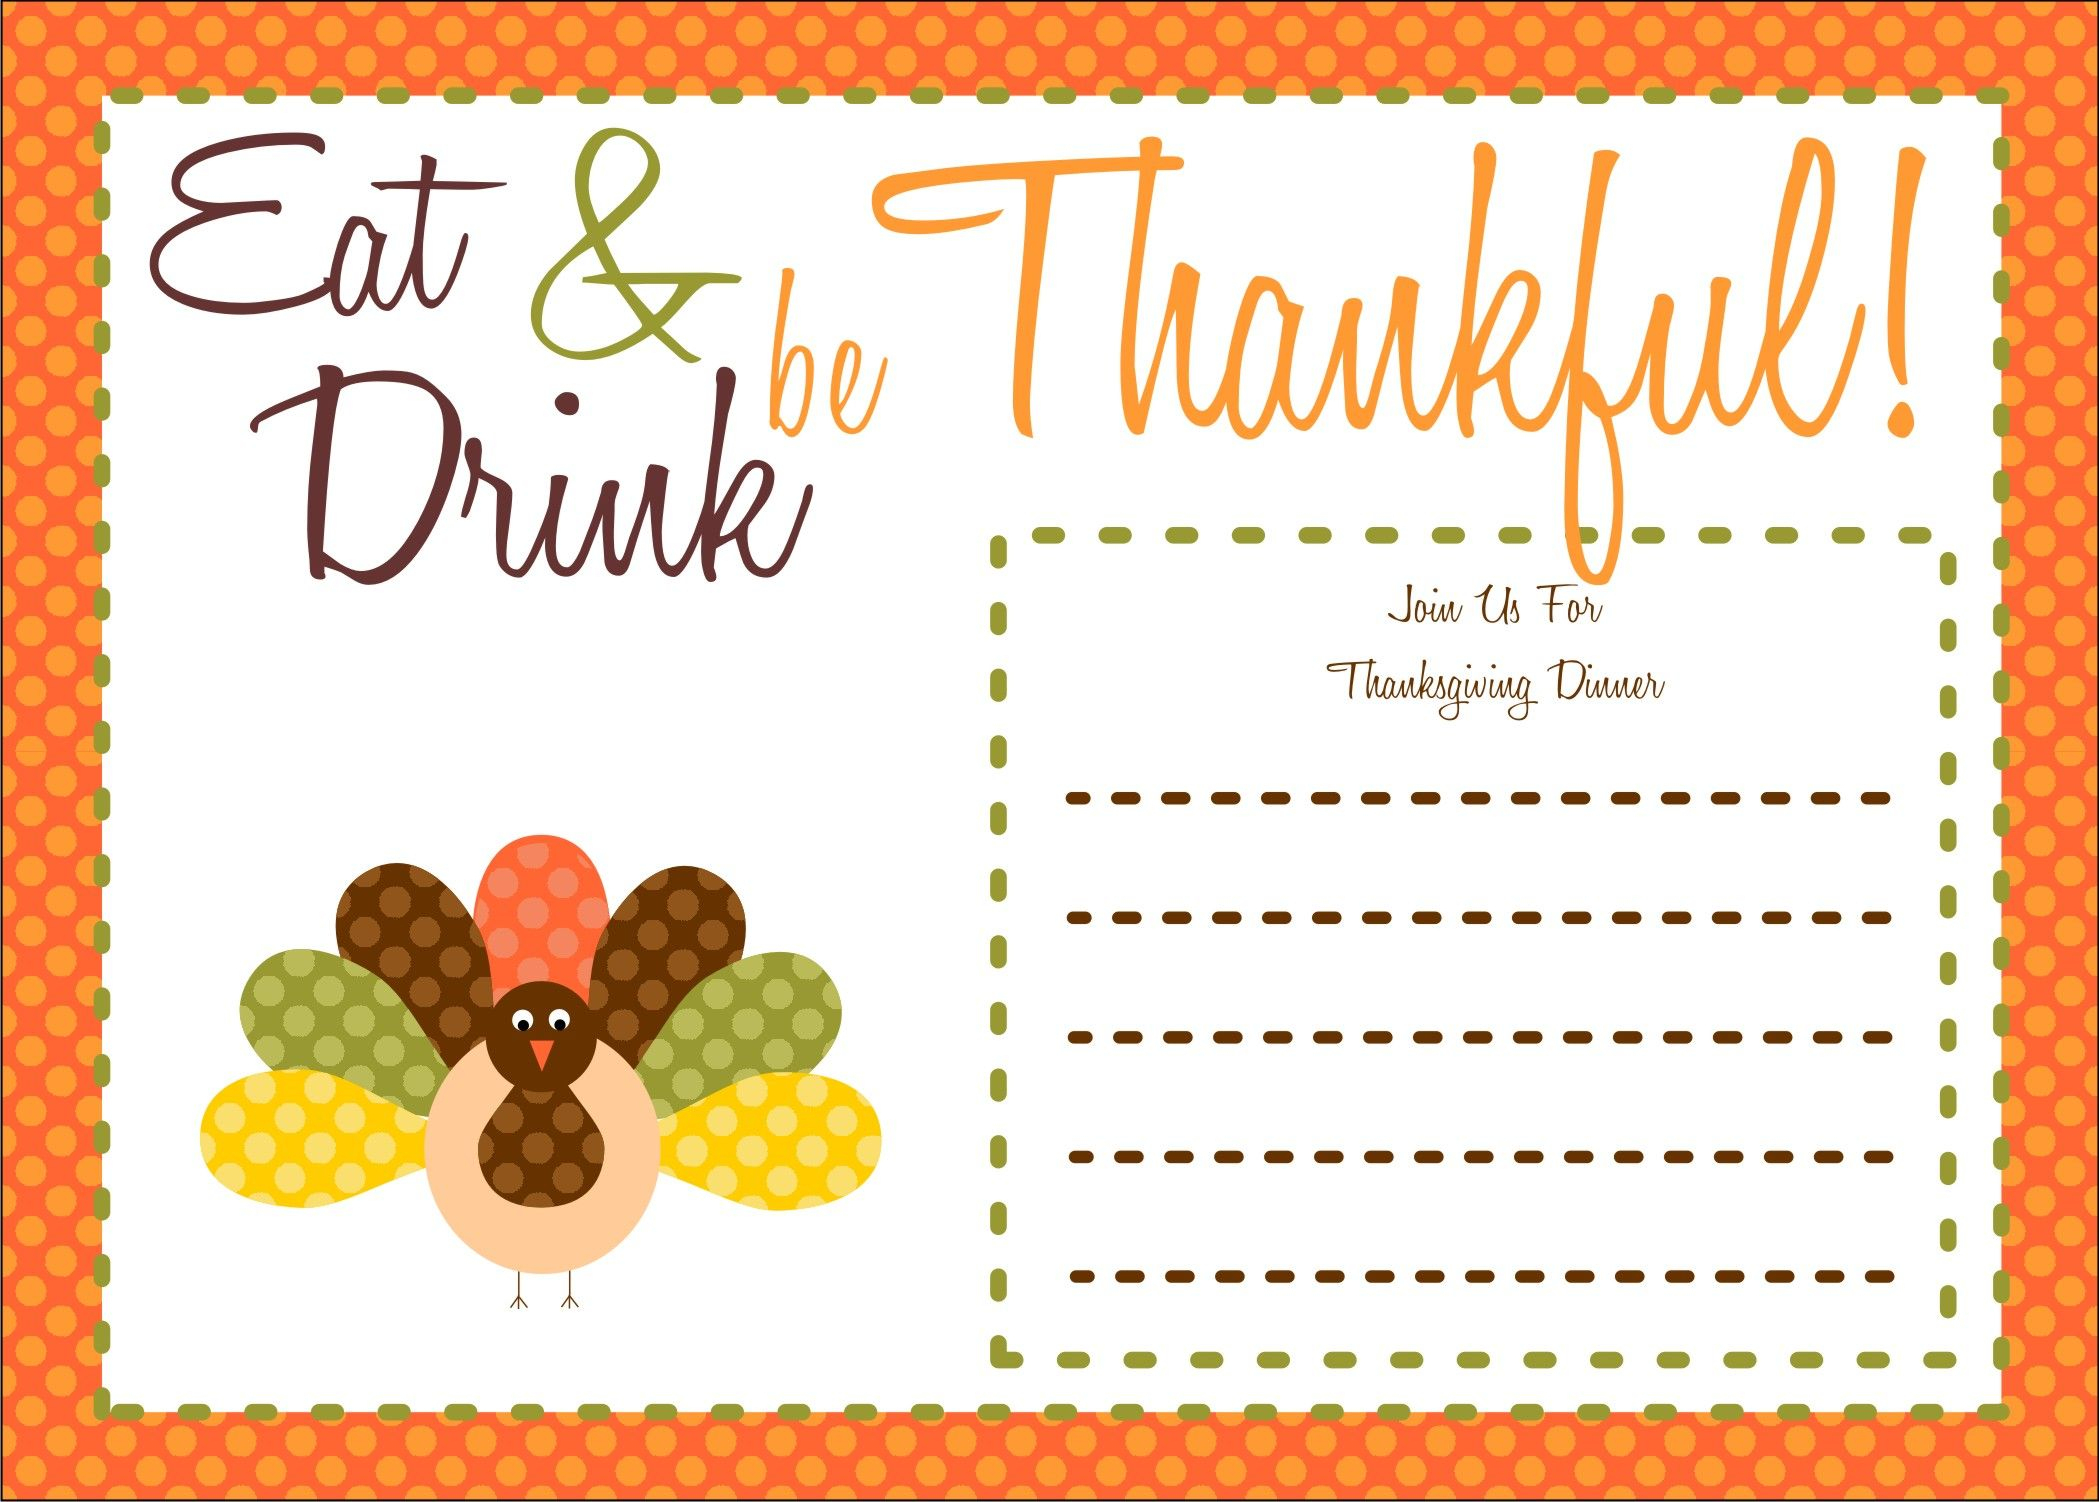 Free Thanksgiving Printables From The Party Bakery | Free Printables - Free Printable Thanksgiving Invitation Templates